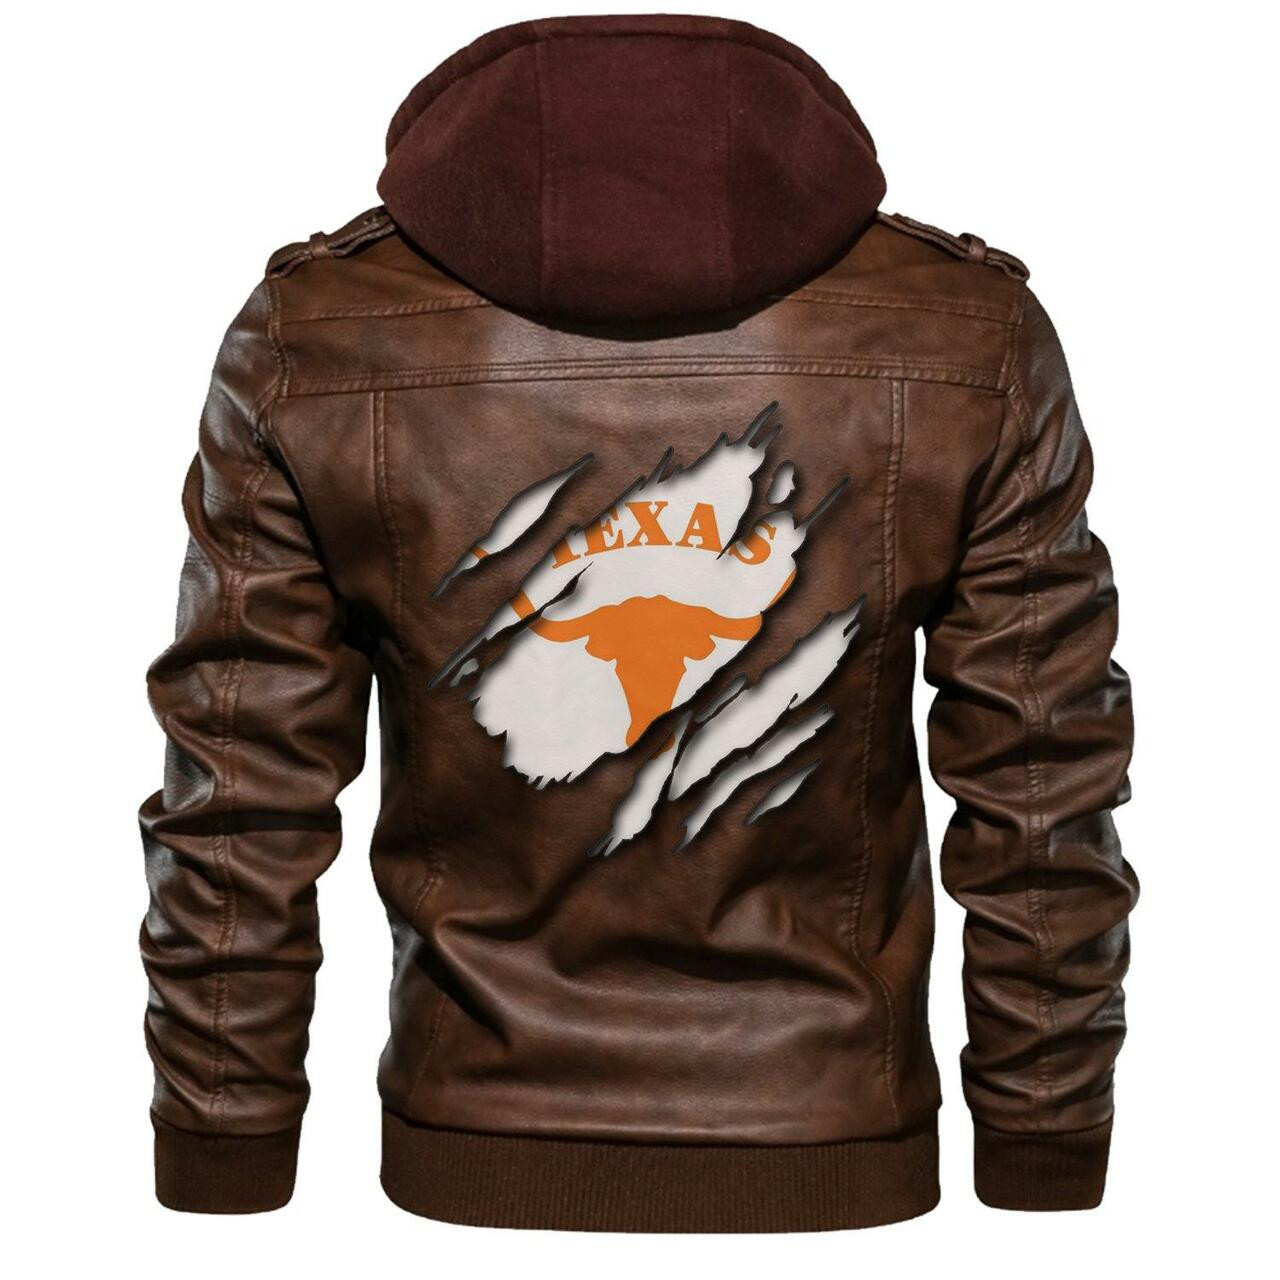 Nice leather jacket For you 227